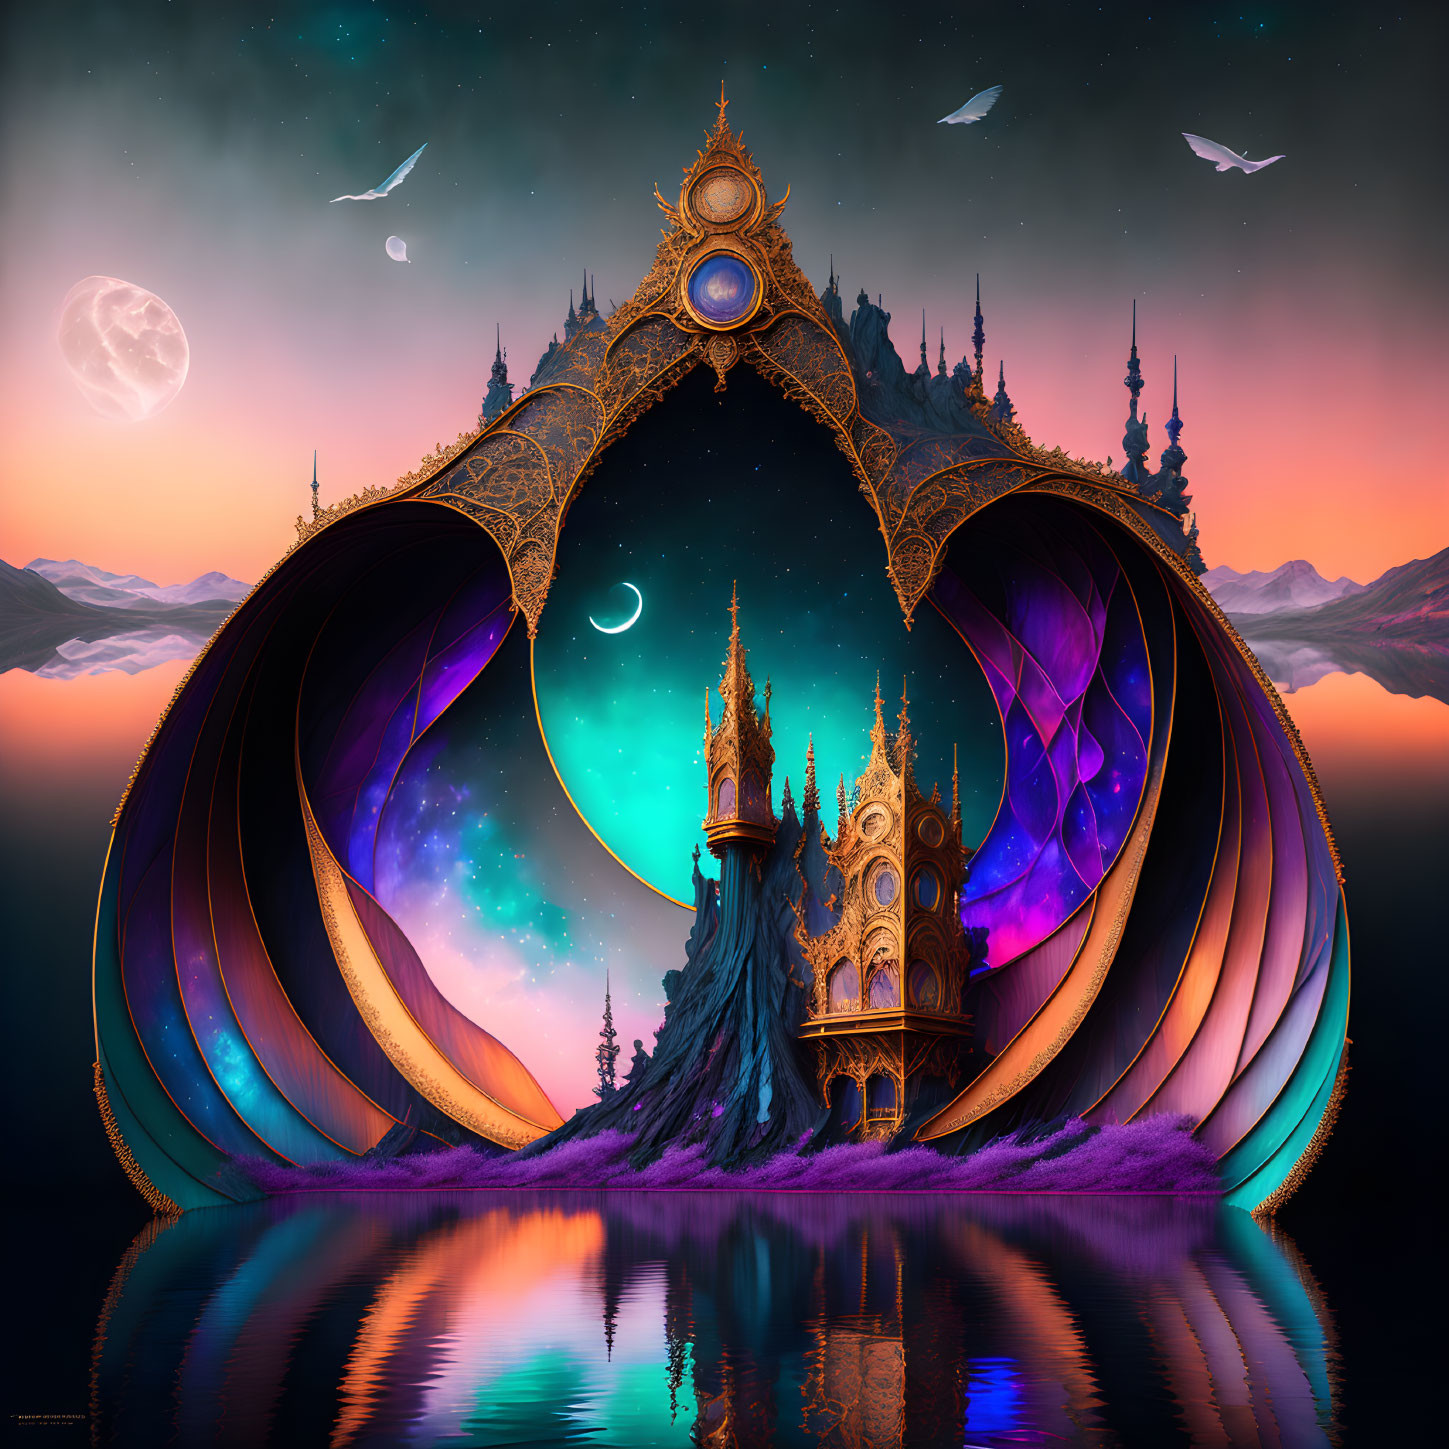 Surreal fantasy image of golden arched portal to magical realm